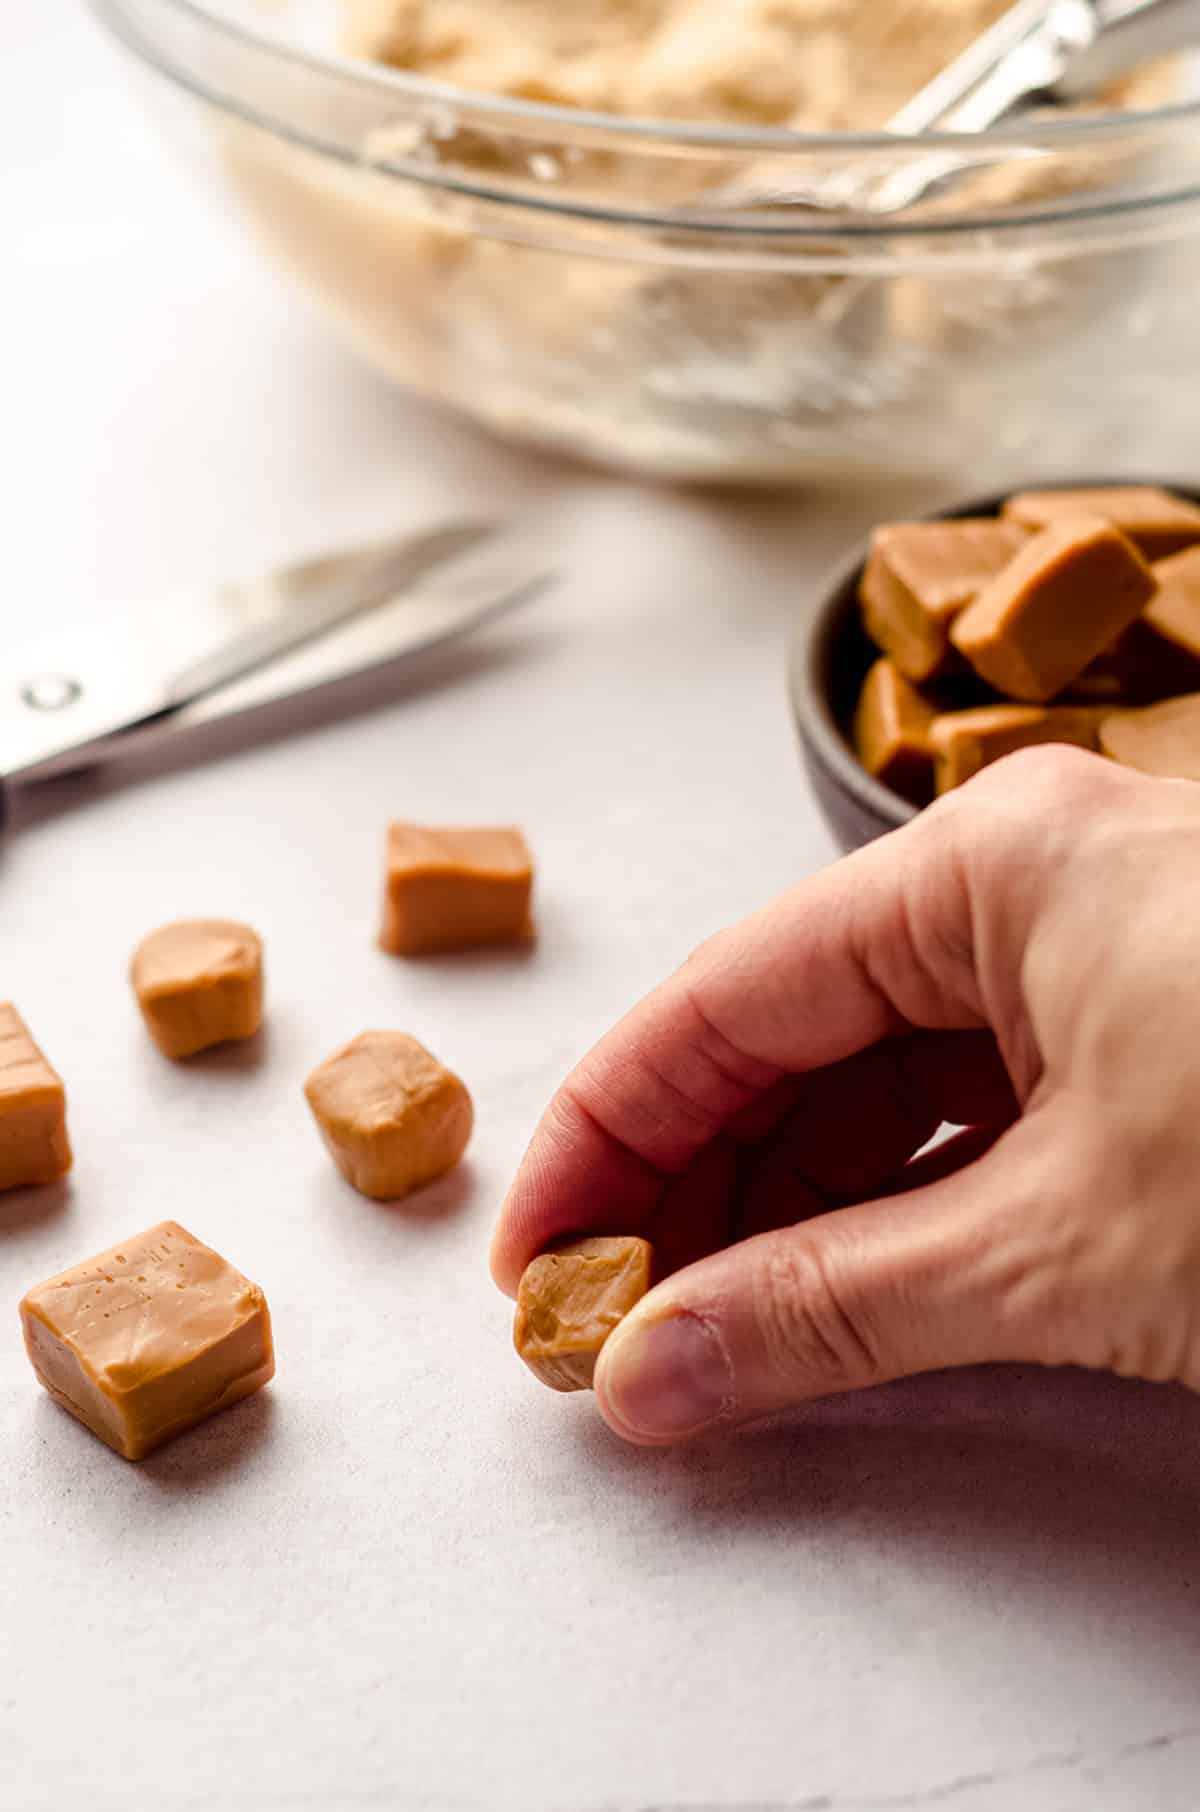 shaping a caramel to put it into cookie dough